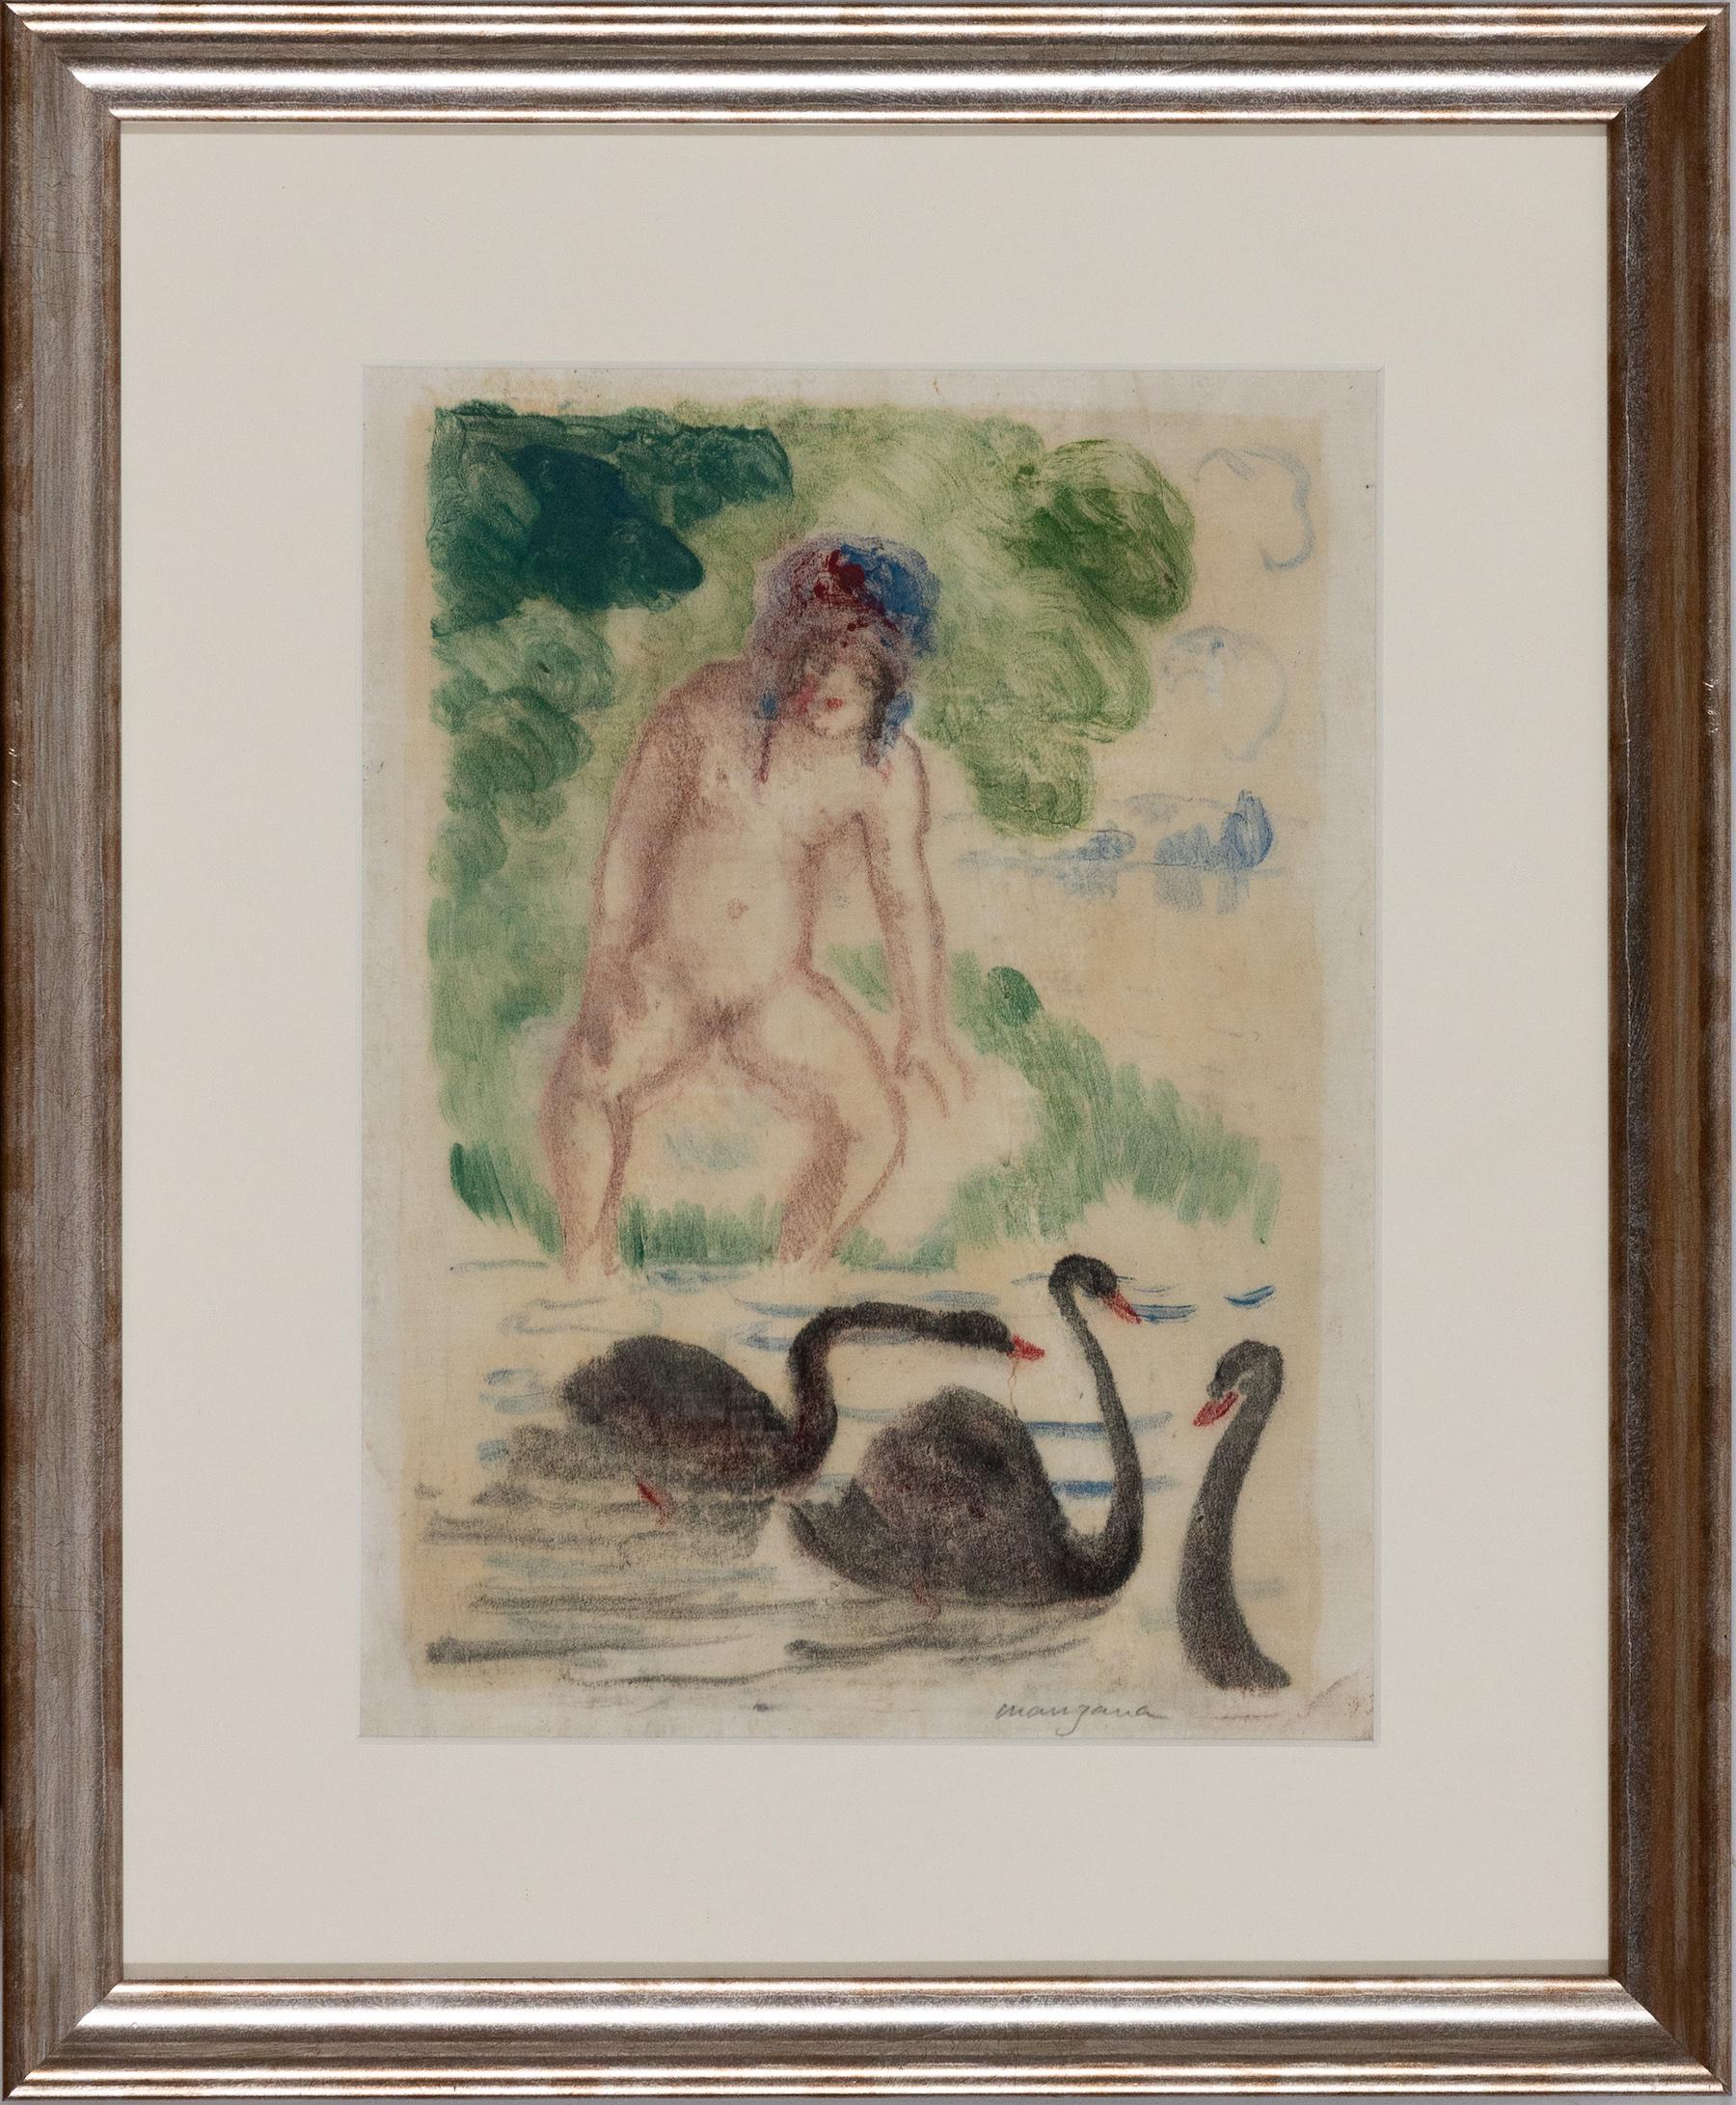 Woman with Black Swans by Georges Manzana Pissarro - Monotype - Print by Georges Henri Manzana Pissarro